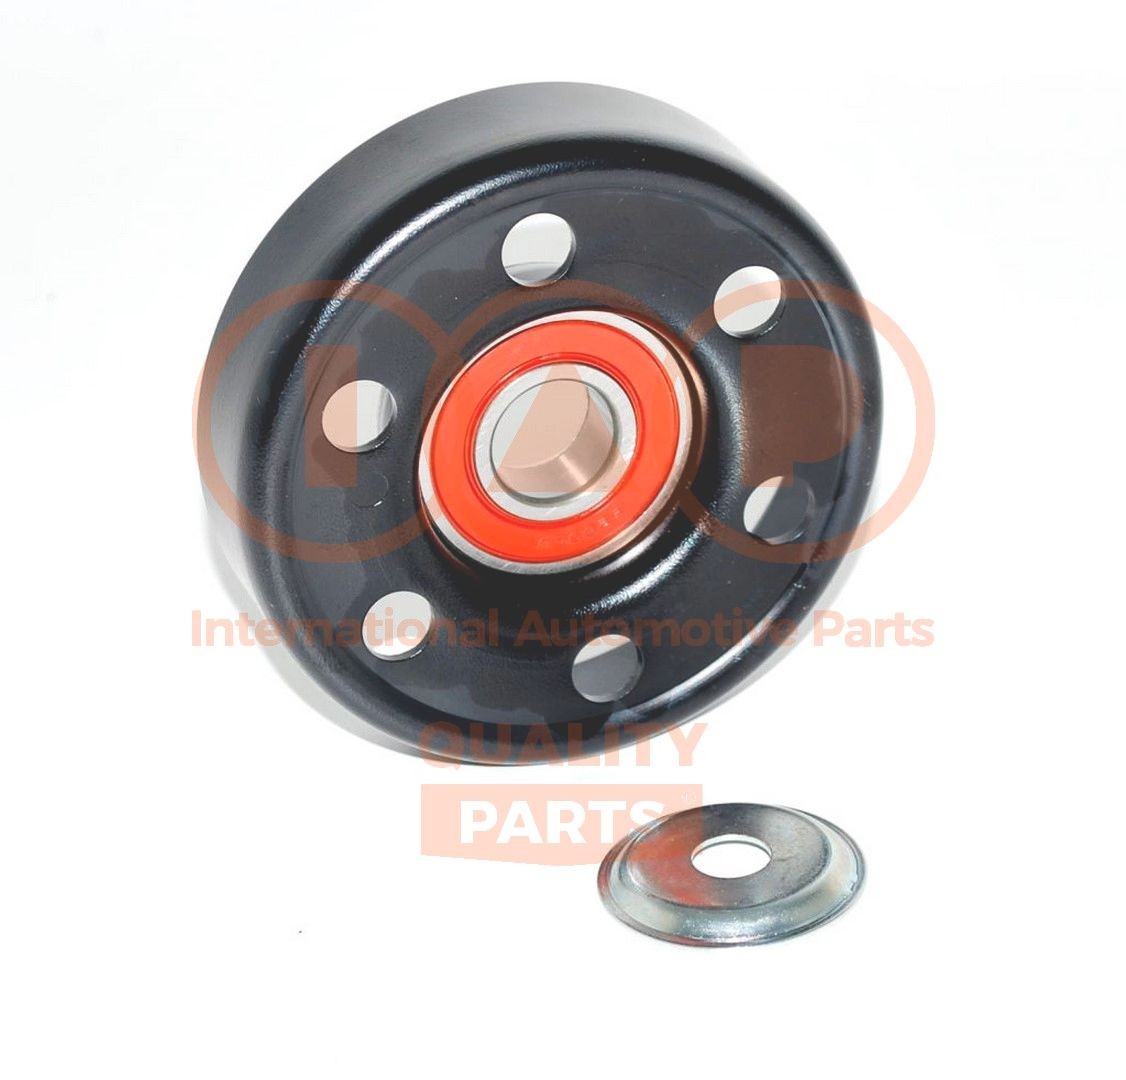 IAP QUALITY PARTS Deflection / Guide Pulley, v-ribbed belt 127-17177 for TOYOTA RAV4, COROLLA, AVENSIS